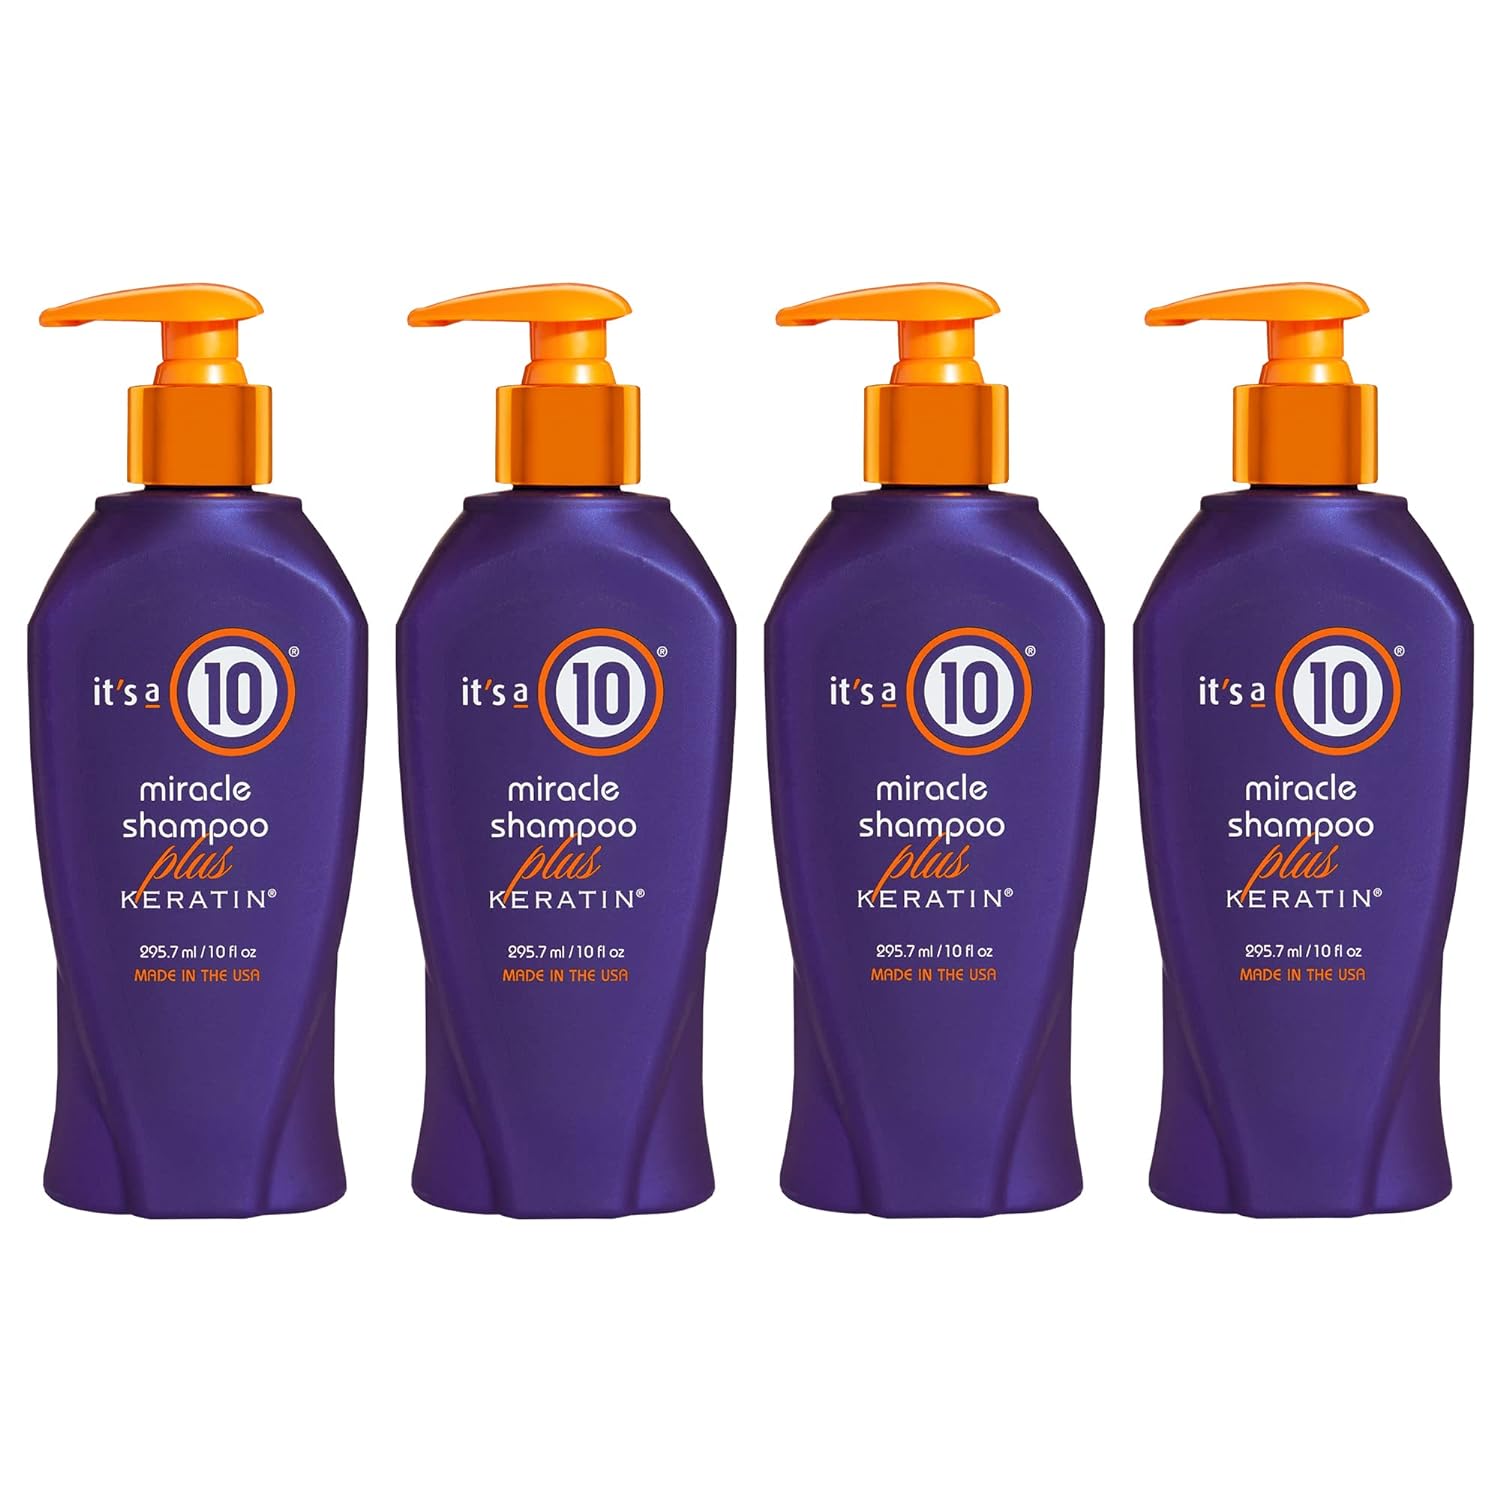 It's a 10 Haircare Miracle Shampoo Plus Keratin, 10 fl. oz. (Pack of 4)